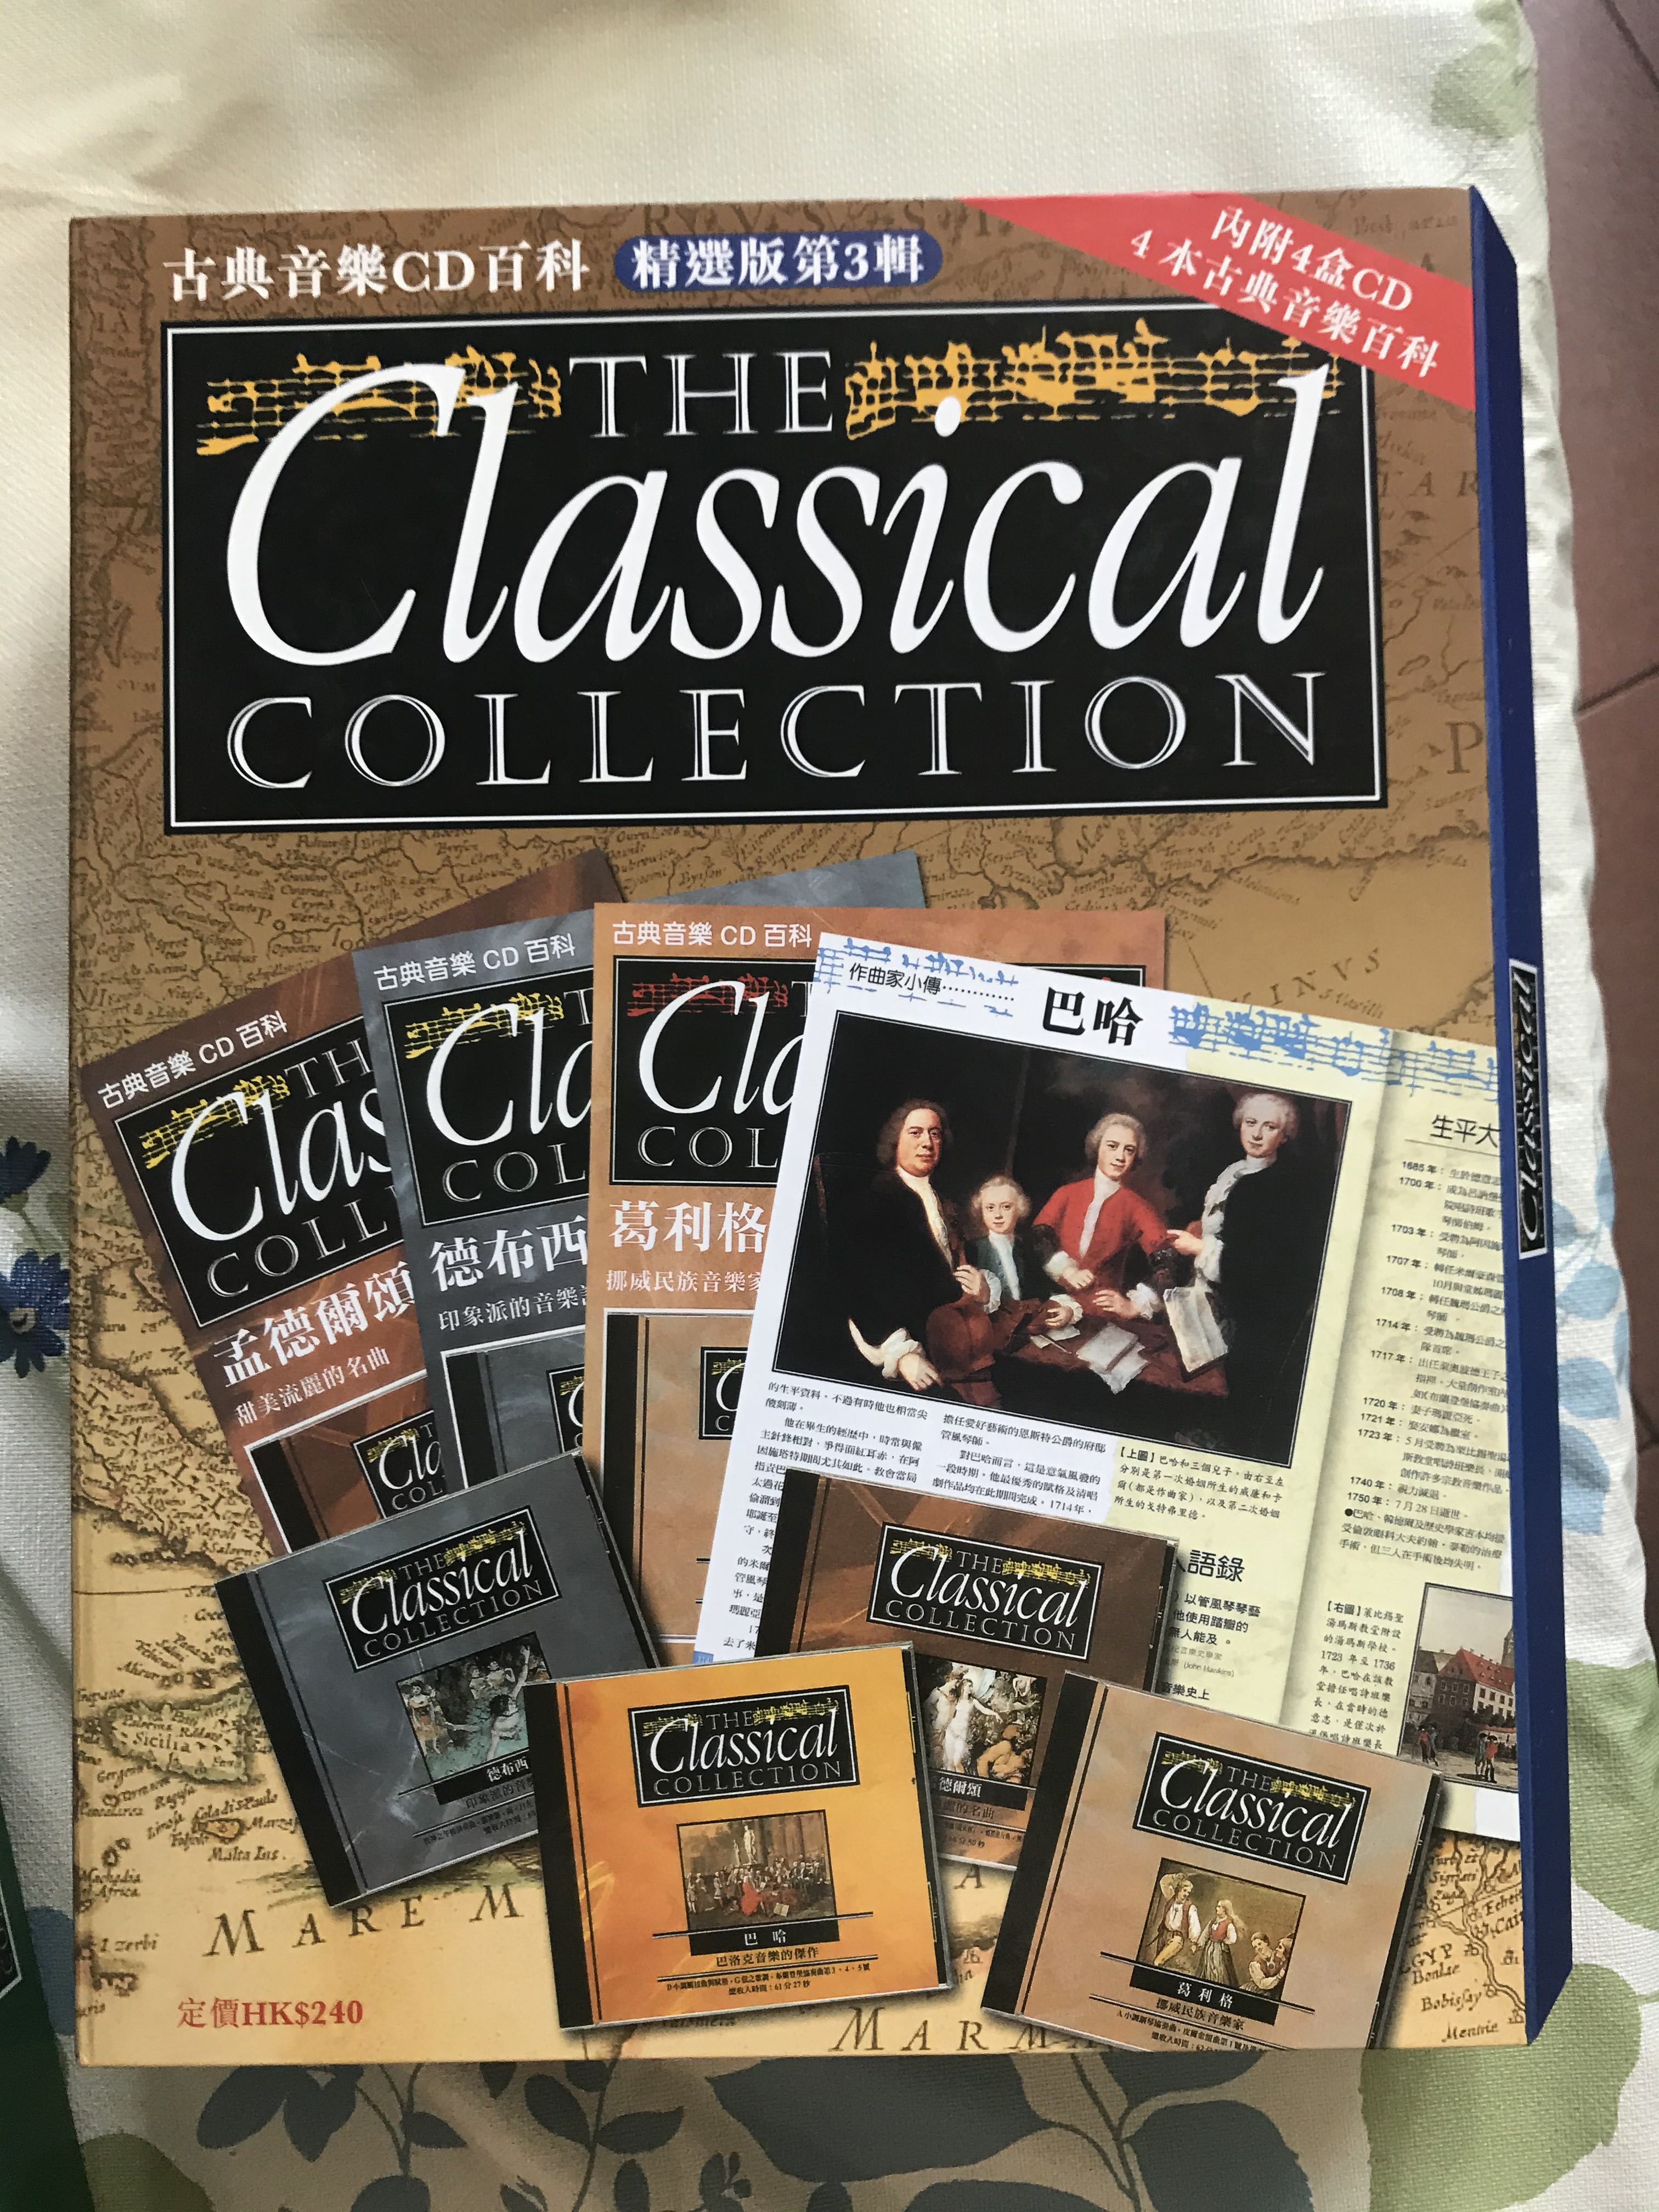 The Classical Music Collection 古典音樂cd百科 Grieg Bach Debussy Mendelssohn